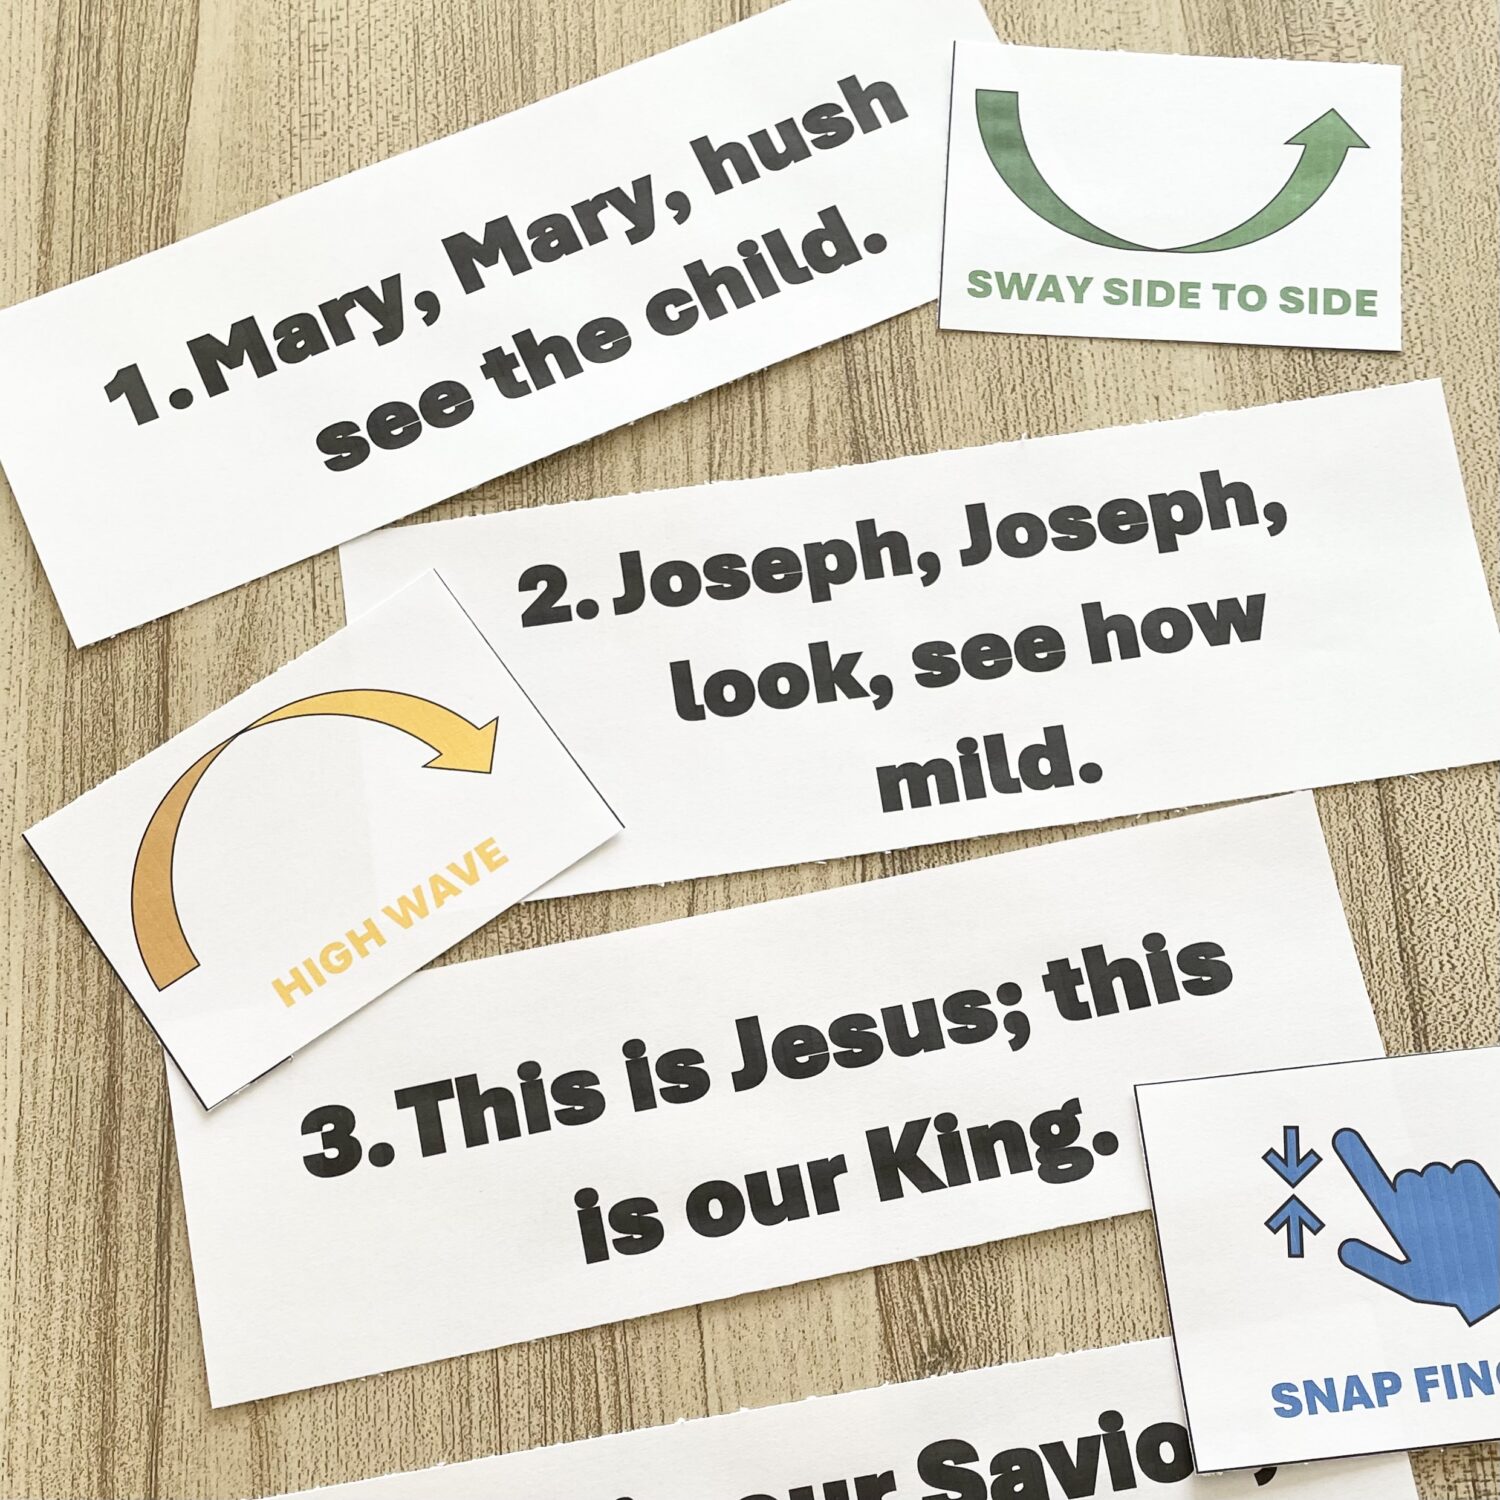 The Shepherd's Carol Actions in a Round - Sing in a round while trying these 4 actions to create a movement round while reviewing this Christmas song for LDS Primary Music Leaders.